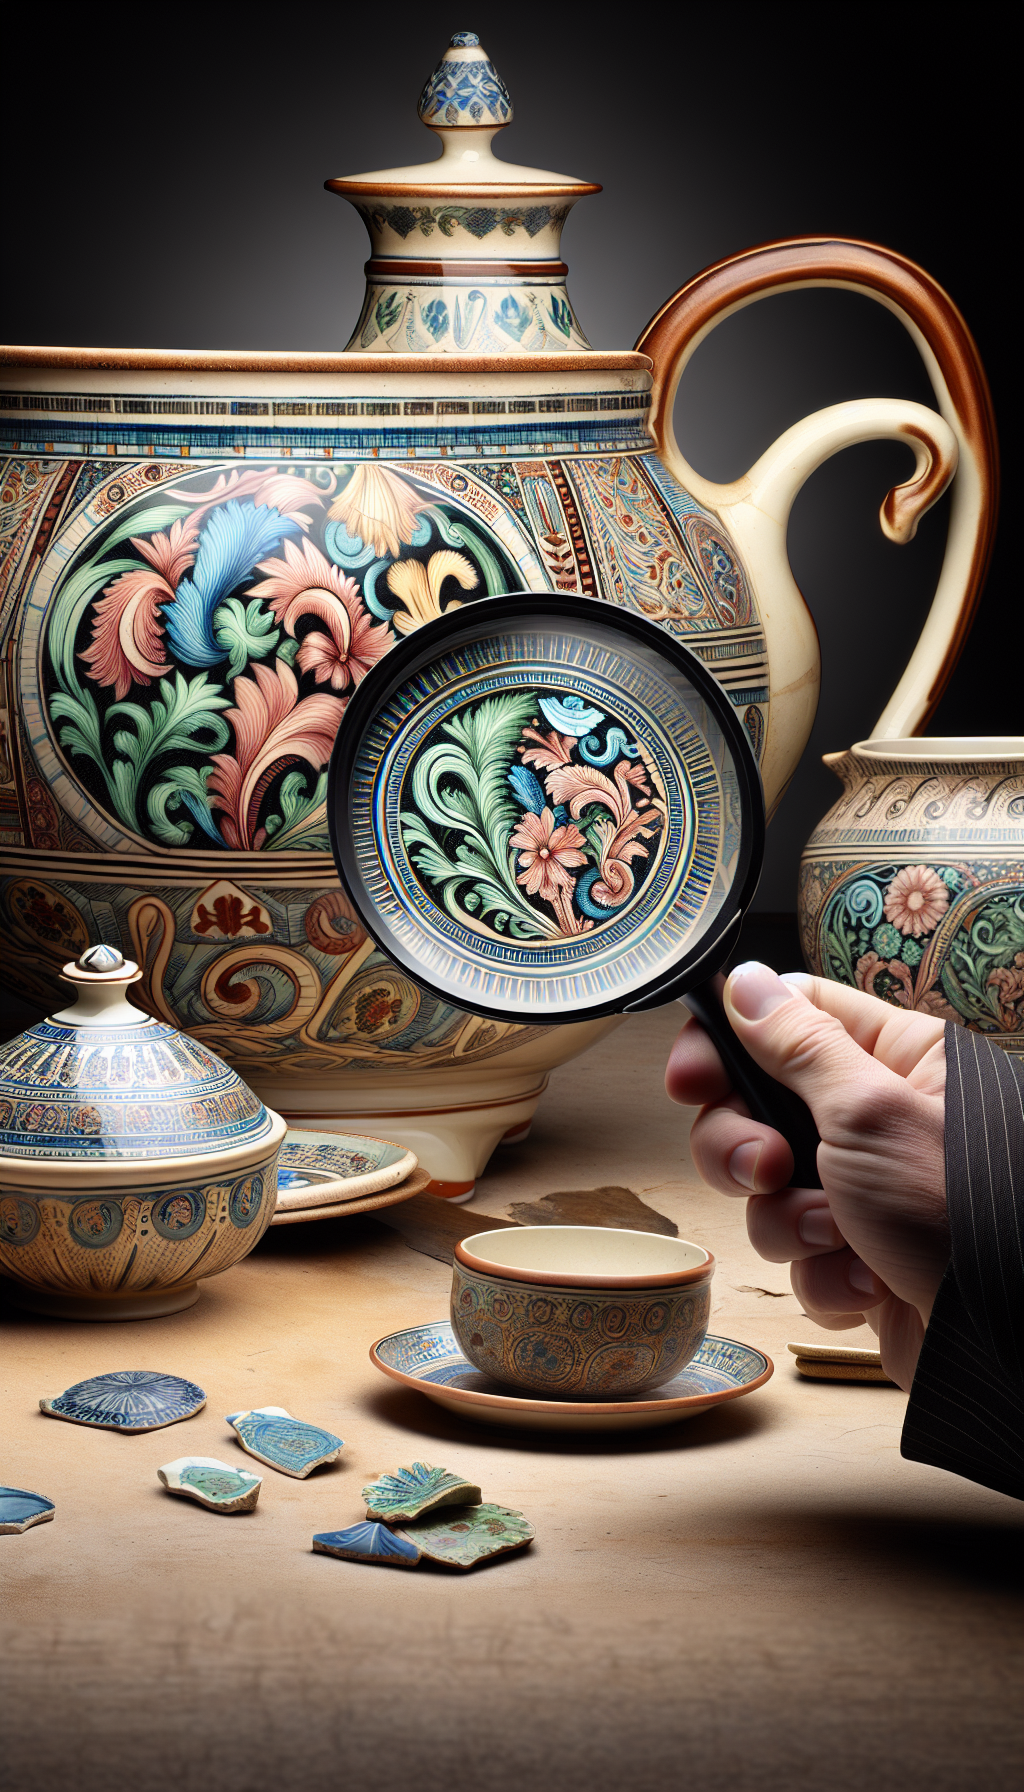 An intricately detailed illustration features a magnifying glass poised over a fragment of antique ceramic, within which a kaleidoscope of historic patterns swirls, revealing fleur-de-lis, paisleys, and Grecian borders. A washbowl and pitcher sit nearby, their faded markings coming into sharp focus under the magnifying lens, as if whispering secrets of their origins to the discerning eye.